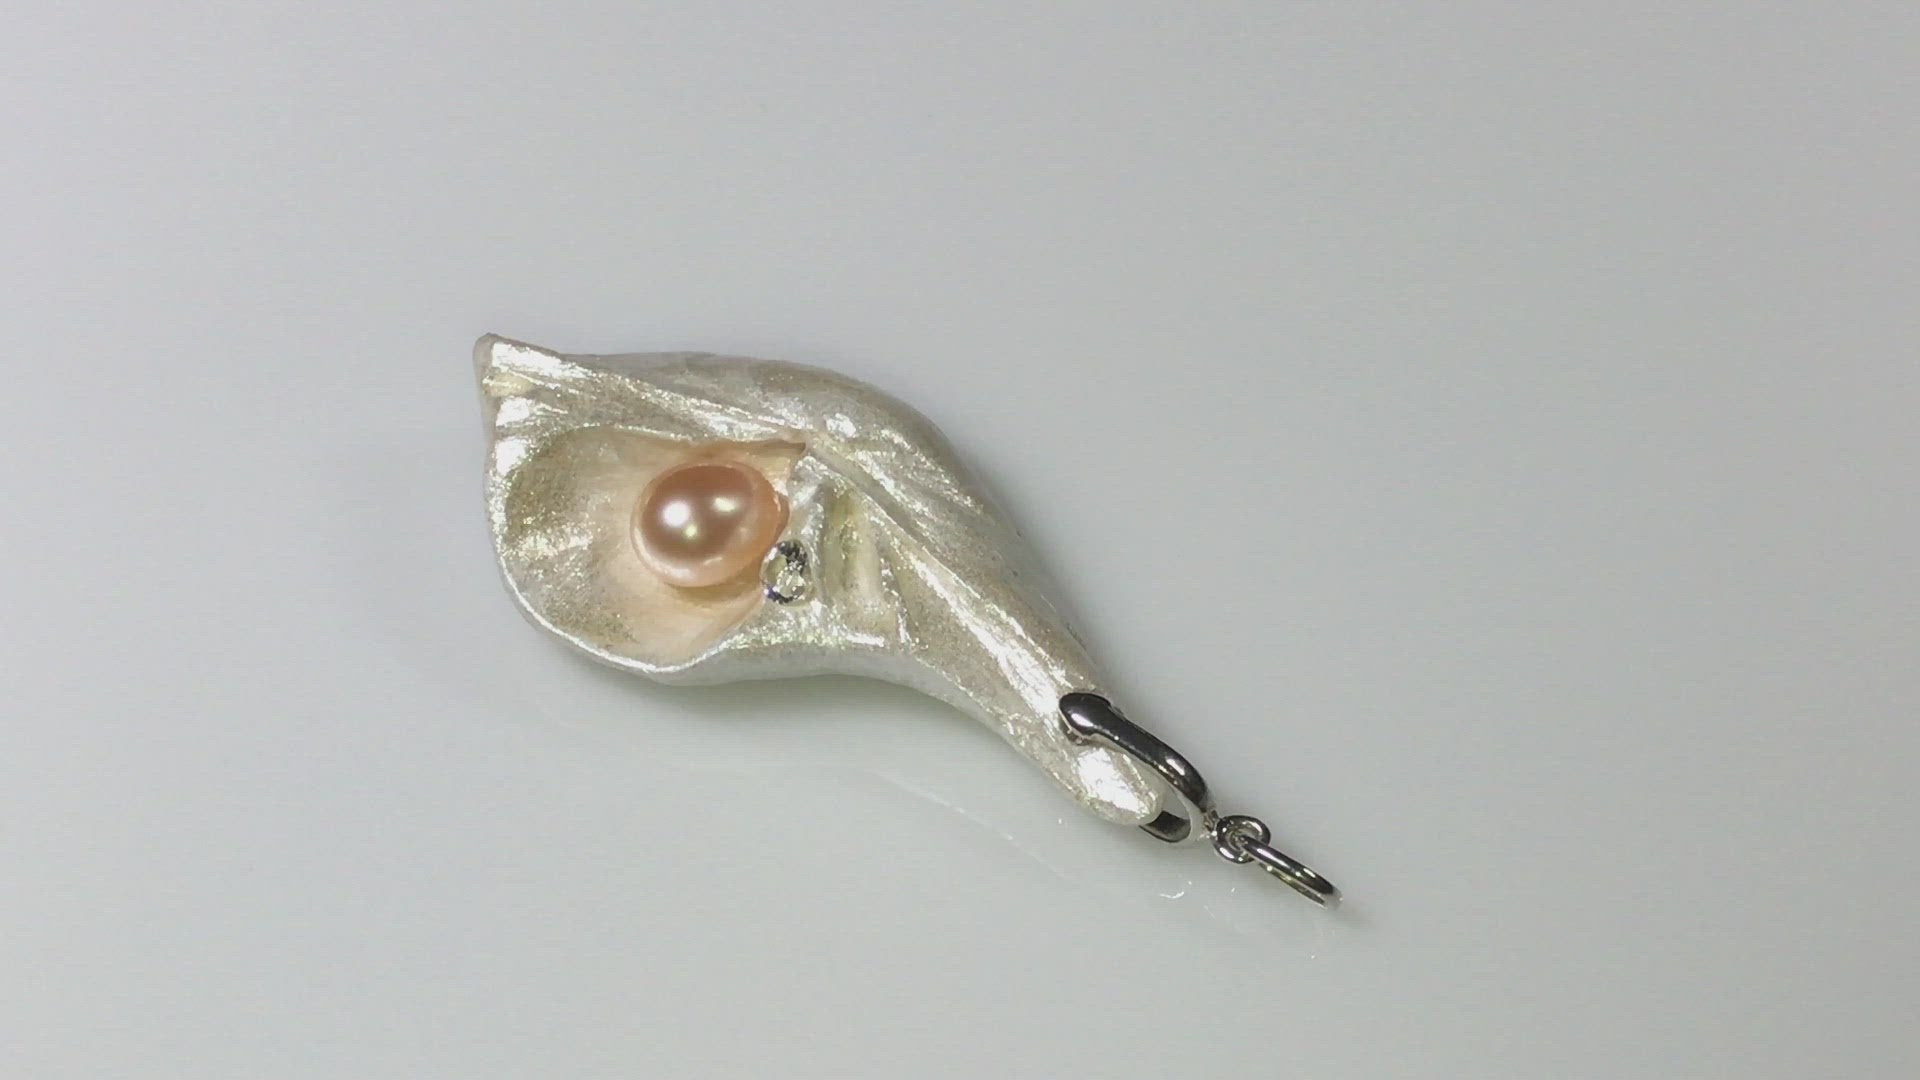 Athena is the name of the pendant being showcased.  It is a natural seashell from the beaches of Vancouver Island. The pendant has a real pink freshwater pearl and a faceted herkimer diamond. It is being showcased in the video.